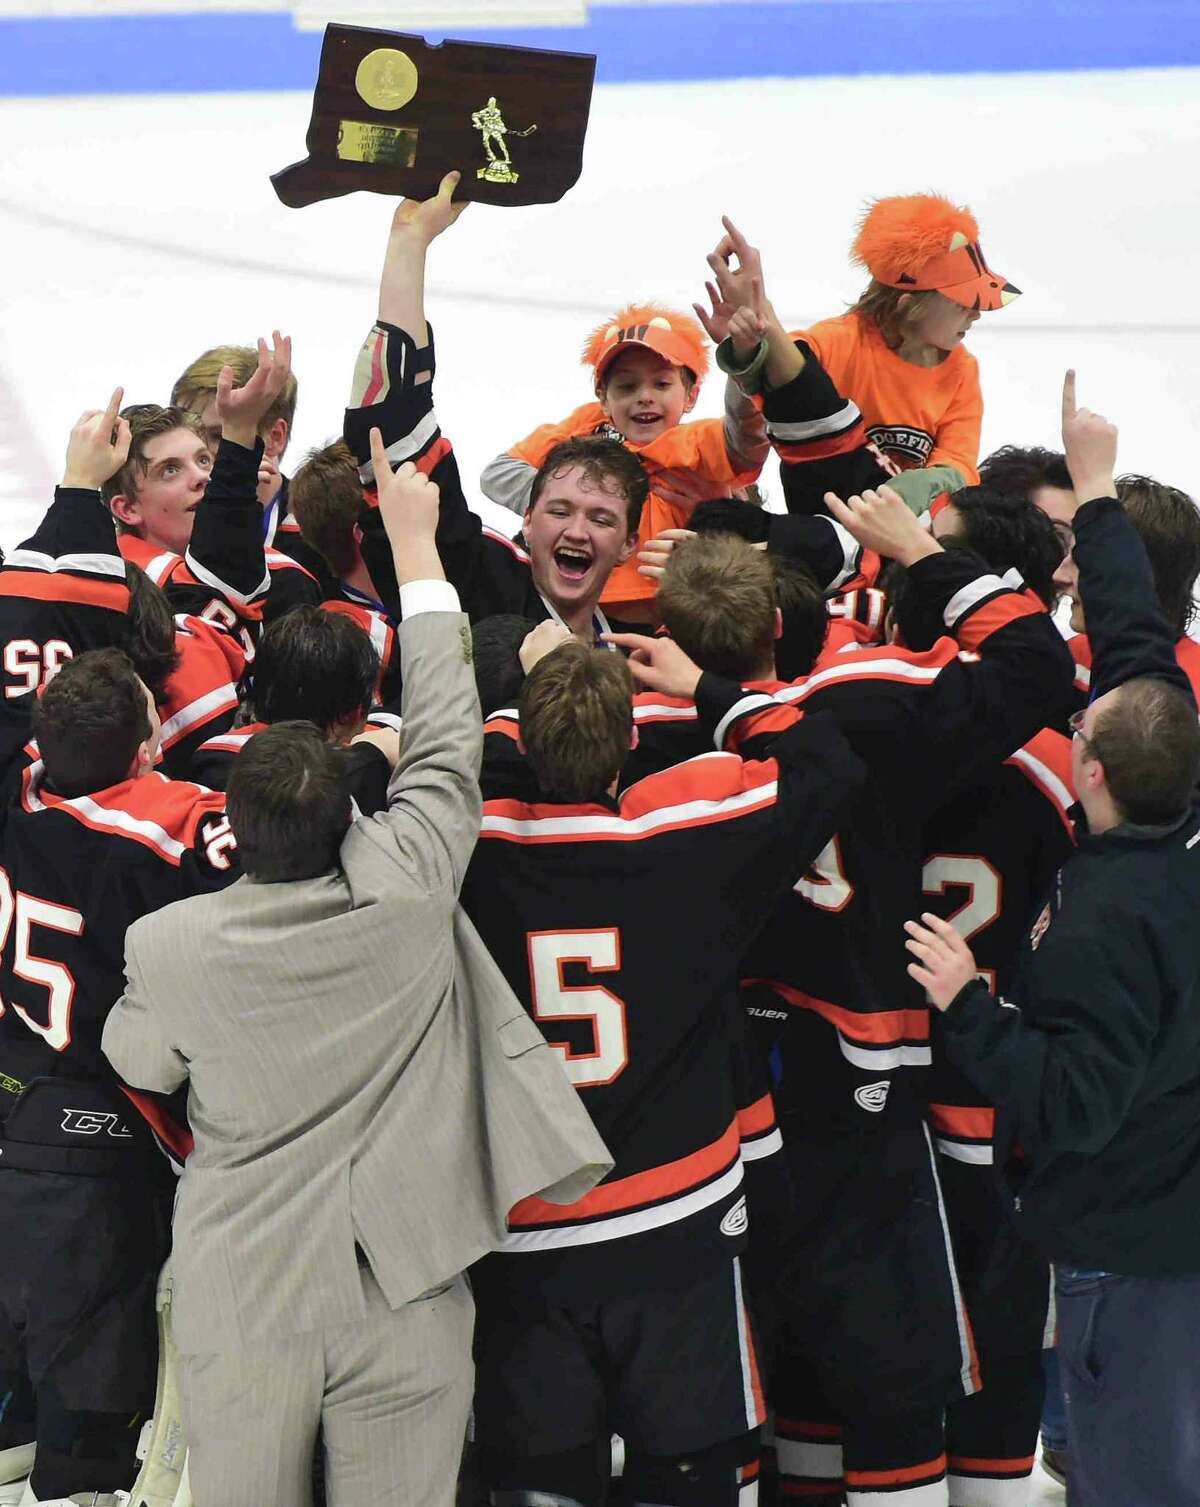 Ridgefield celebrates its CIAC Division 1 Boys High School Hockey Championship at Ingalls Rink at Yale University in New Haven, Monday evening, March 20, 2017. Ridgefield H.S. defeated North West Catholic H.S. 6-2. Photo Peter Hvizdak